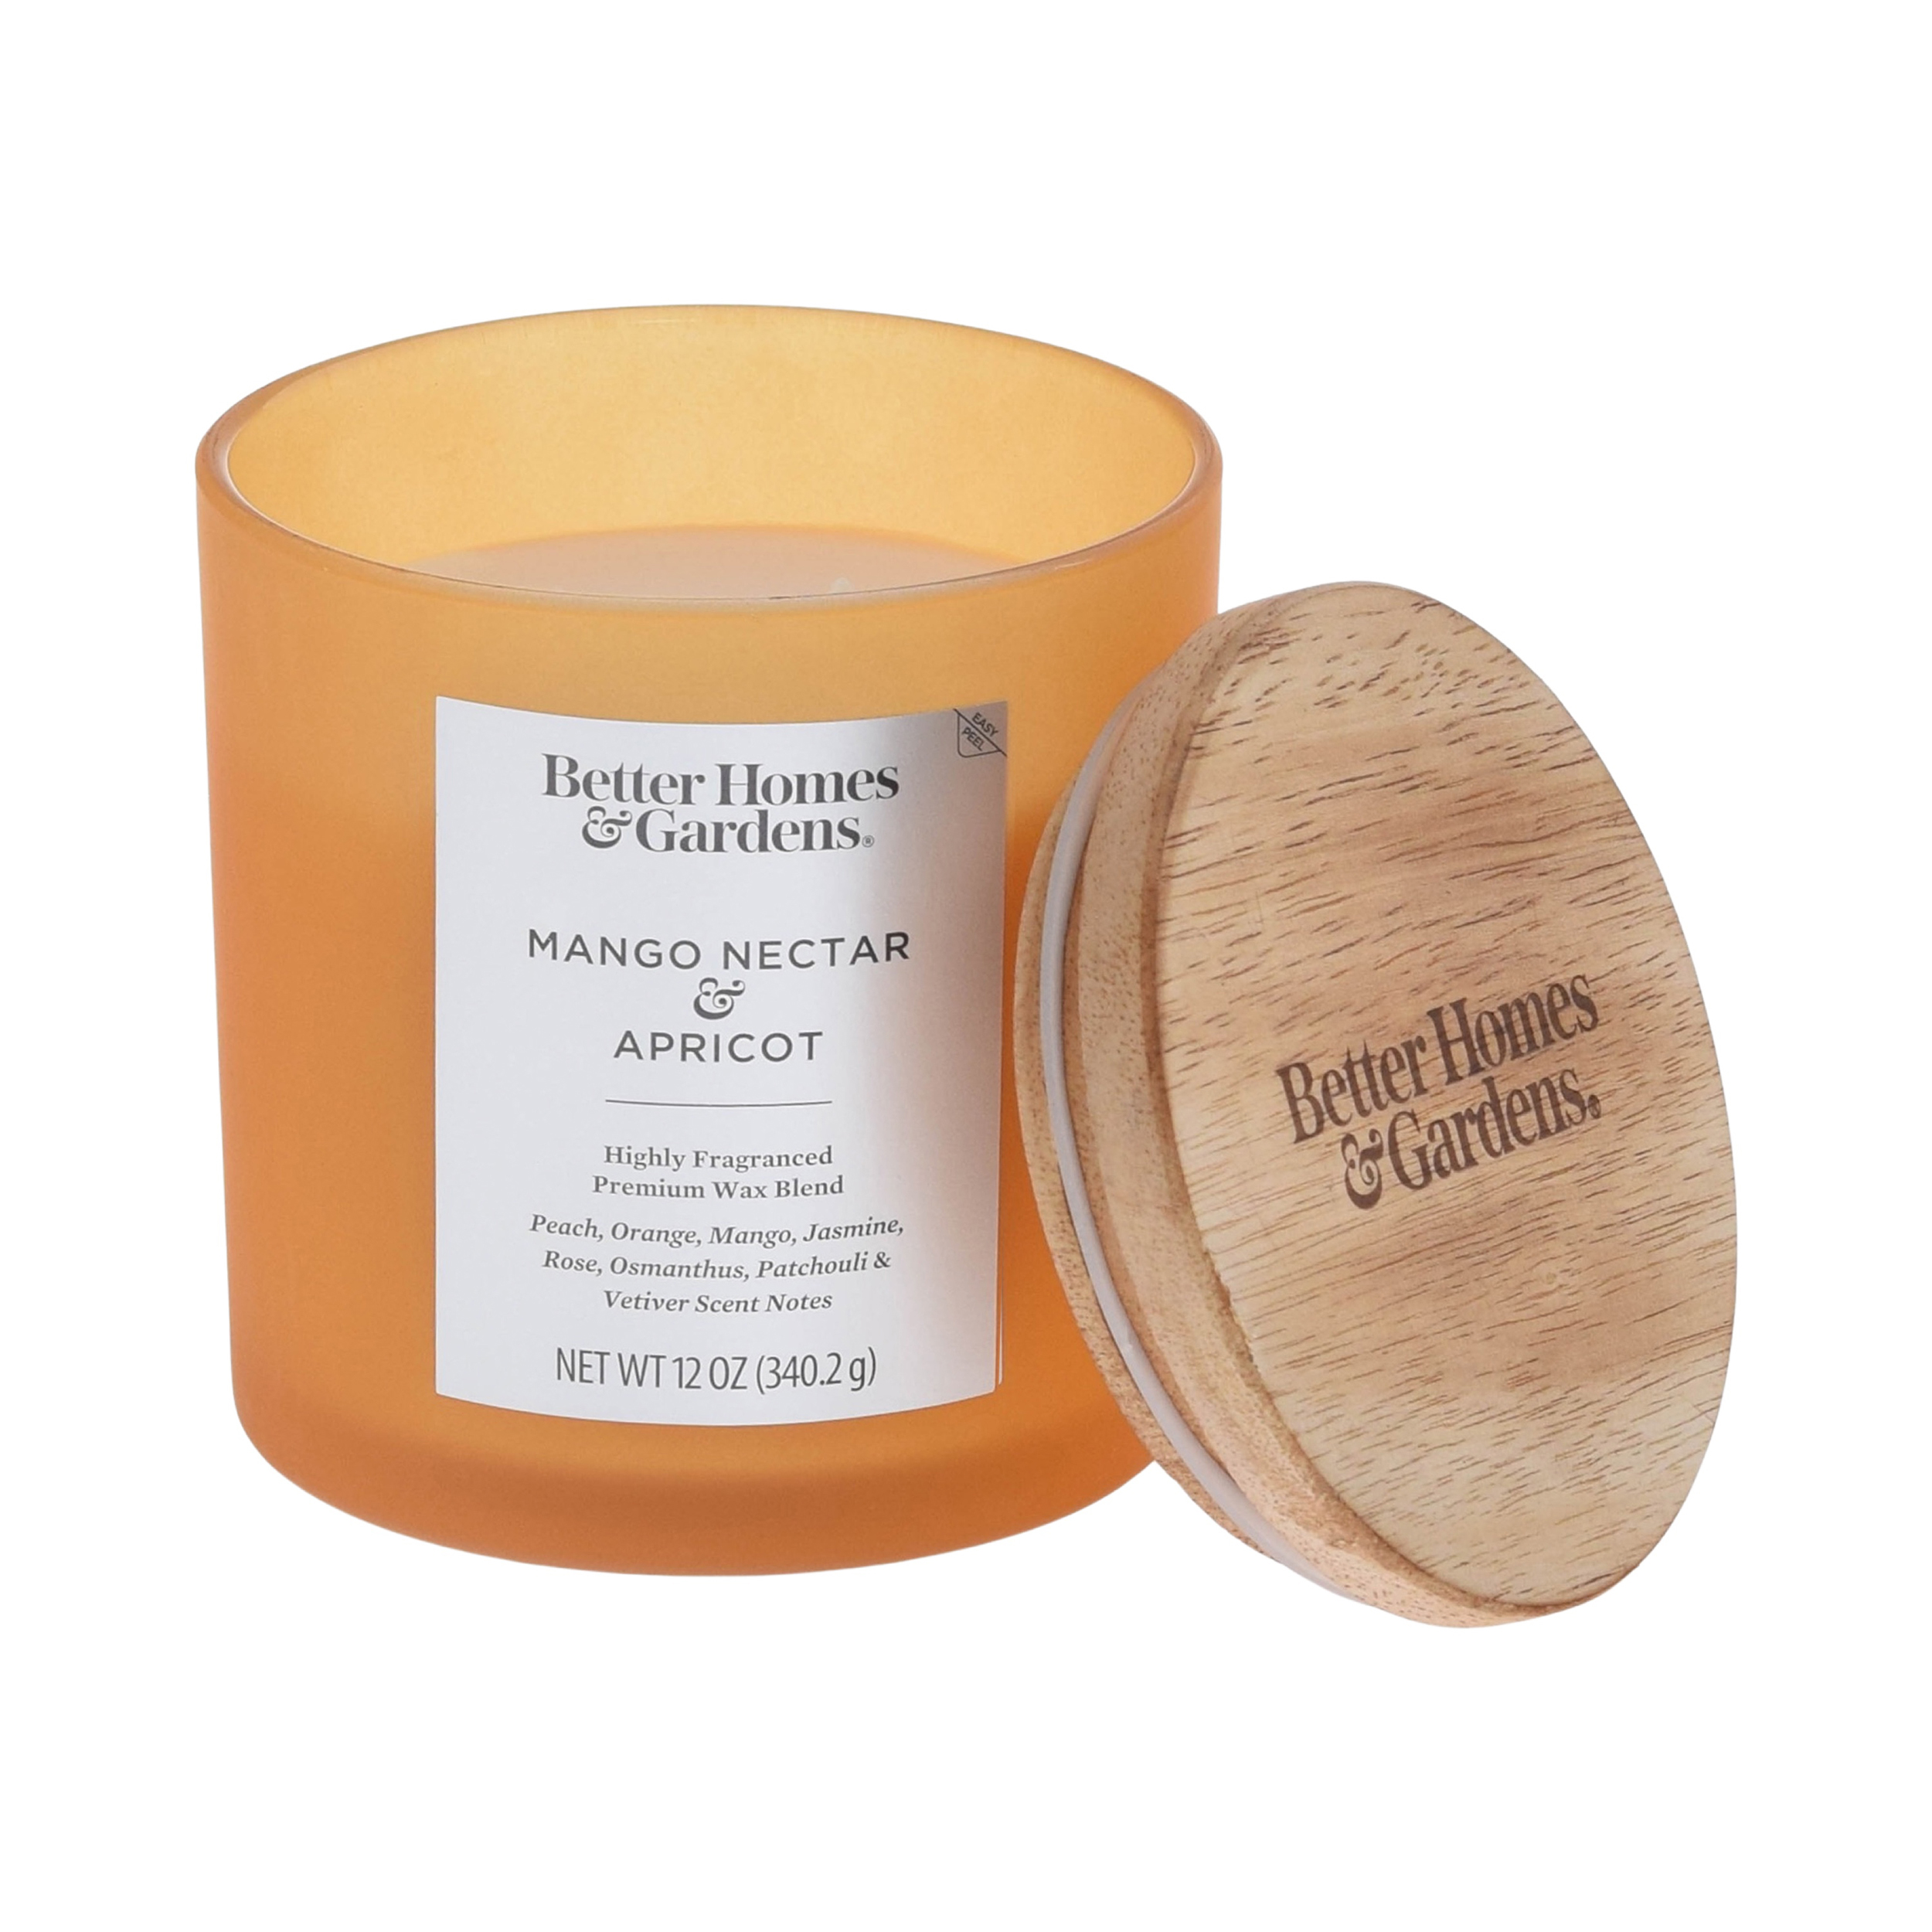 Better Homes & Gardens 12oz Mango Nectar & Apricot Scented 2-Wick Frosted Jar Candle - image 2 of 5